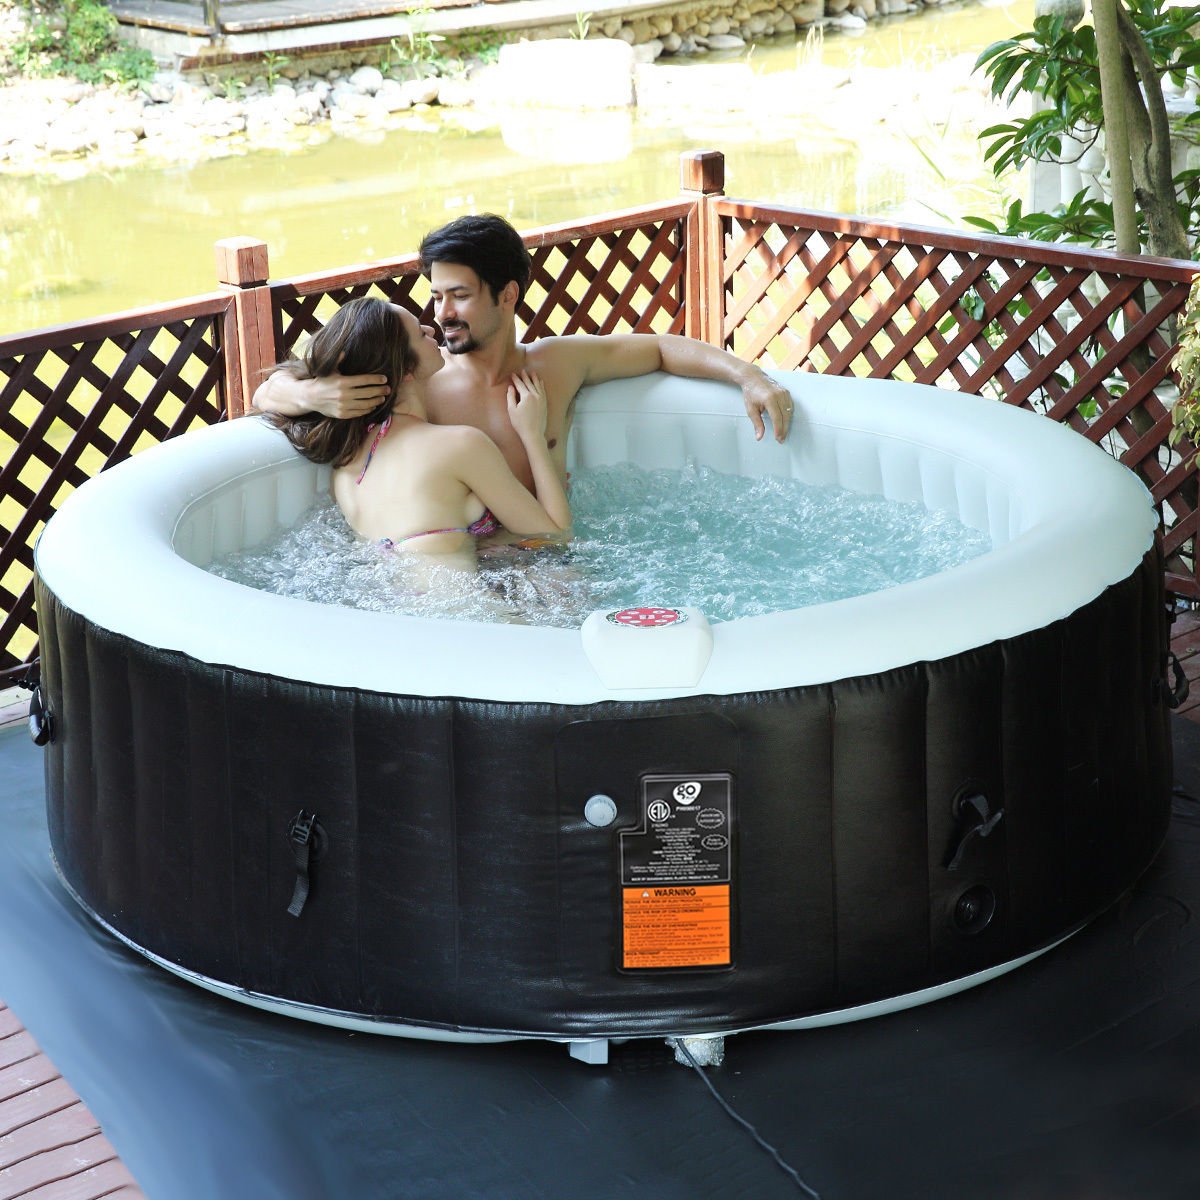 How to heat a hot tub without a heater